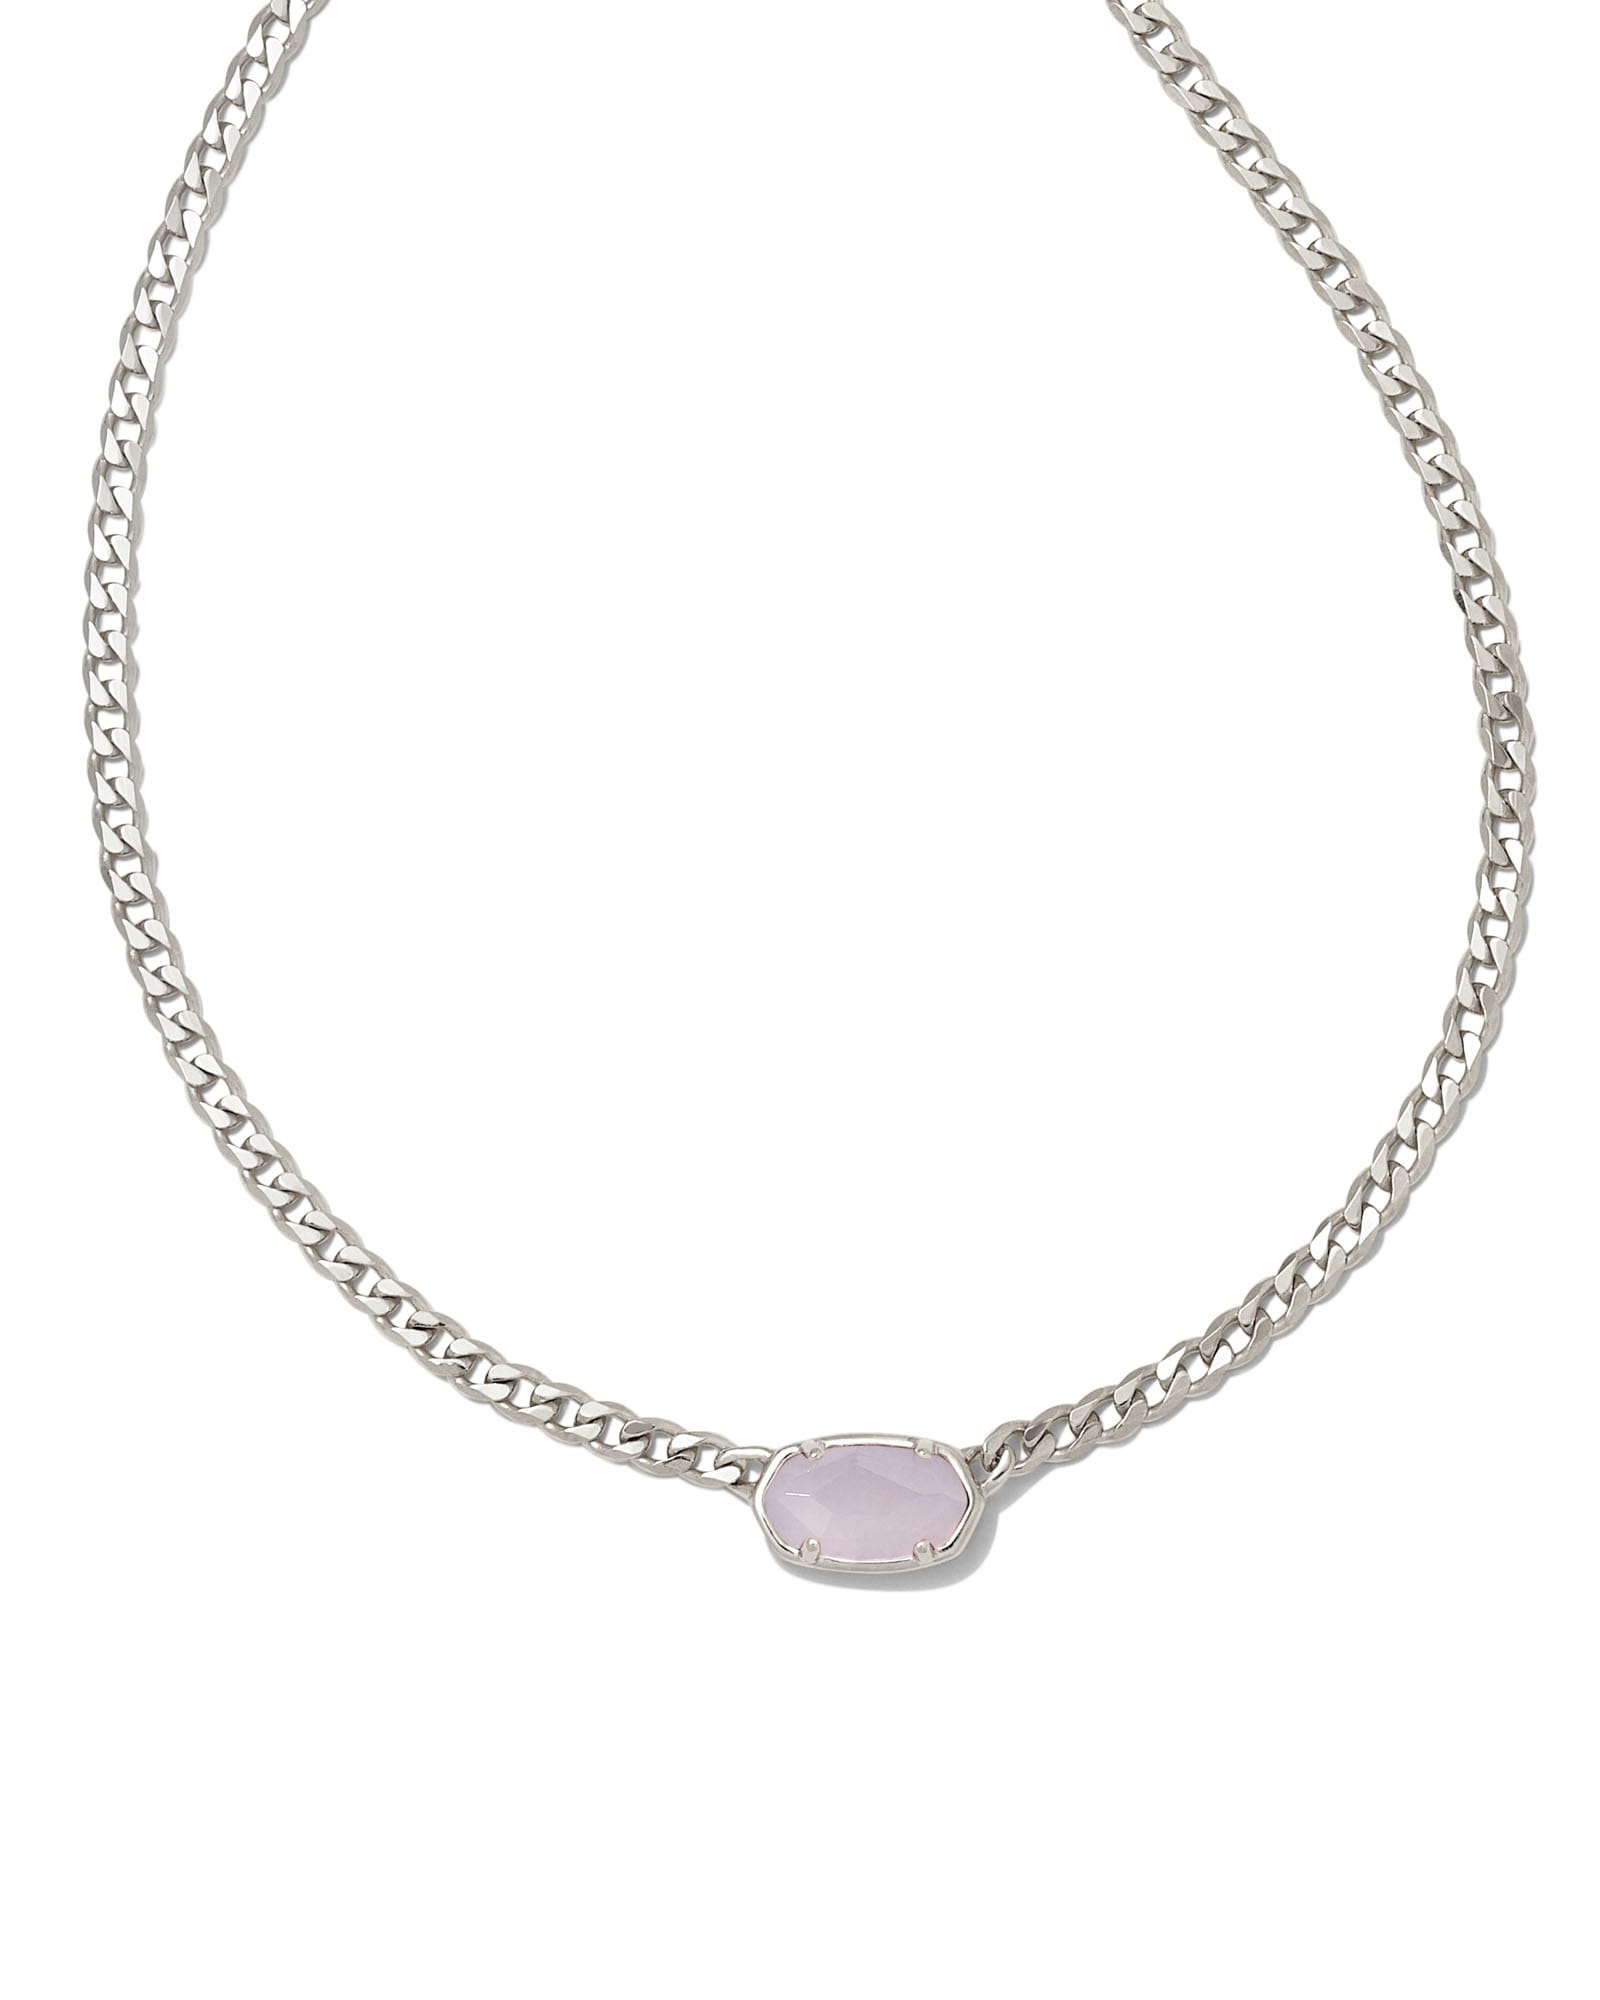 Kendra Scott Fern Sterling Silver Curb Chain Necklace in Blue Gray Chalcedony | Namibian Chalcedony